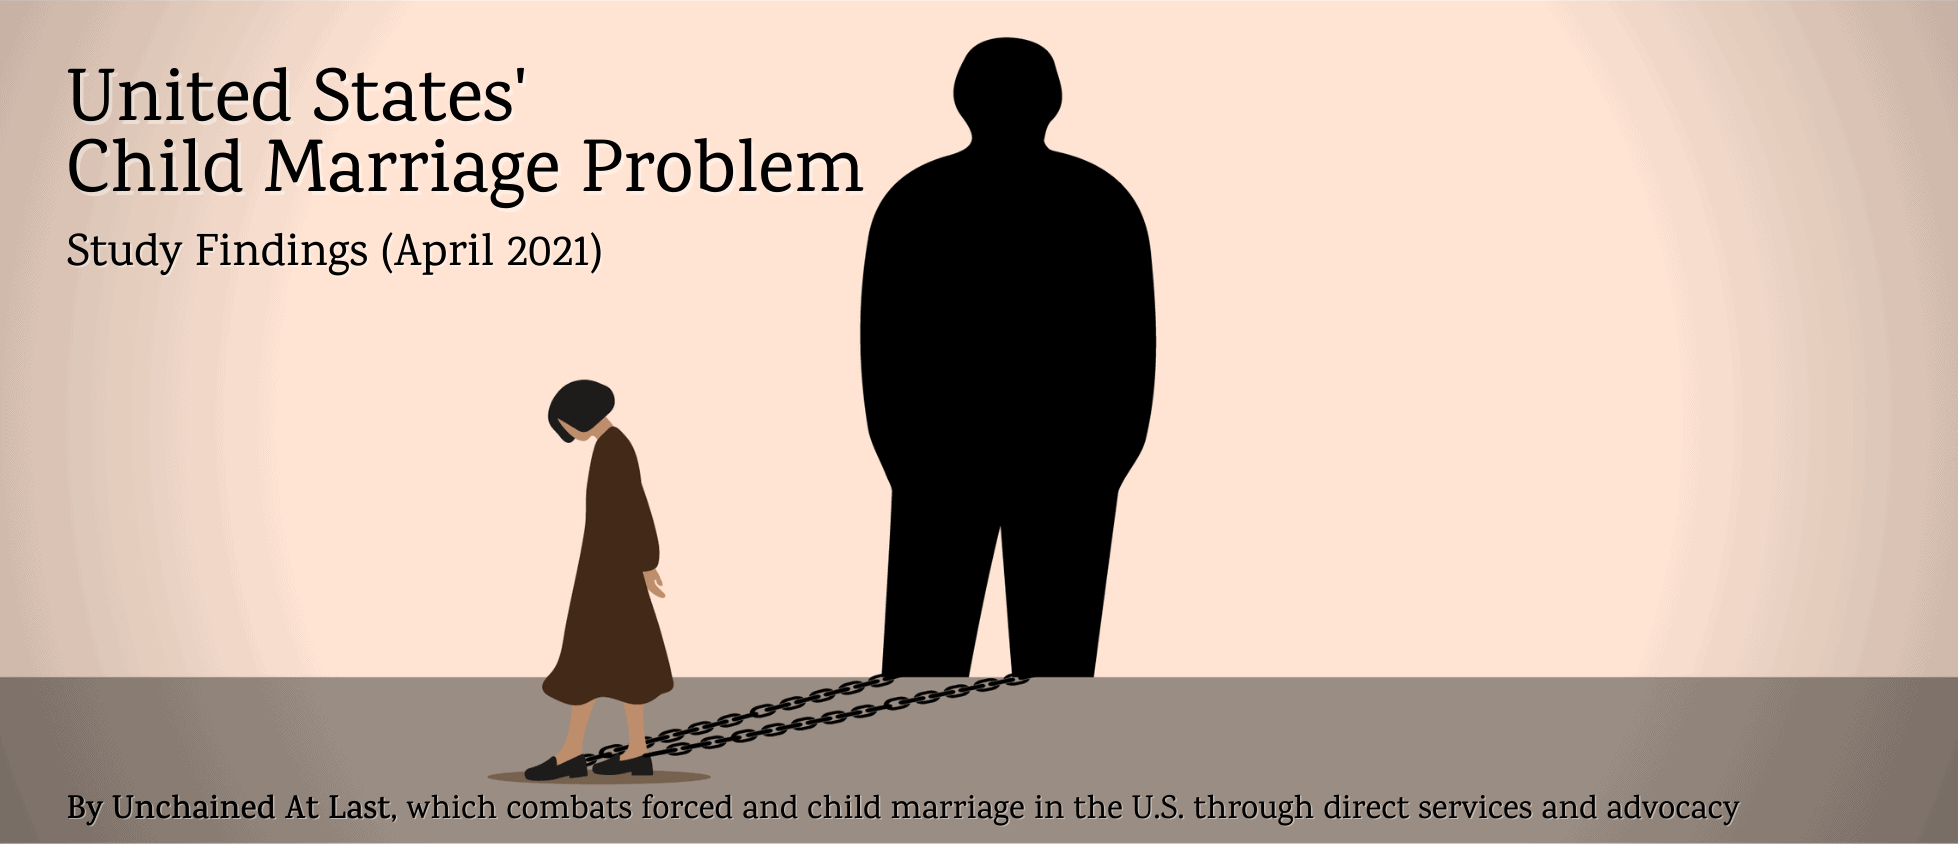 Title image: United States' Child Marriage Problem study findings (April 2021). By Unchained At Last, which combats forced and child marriage in the U.S. though direct services an advocacy